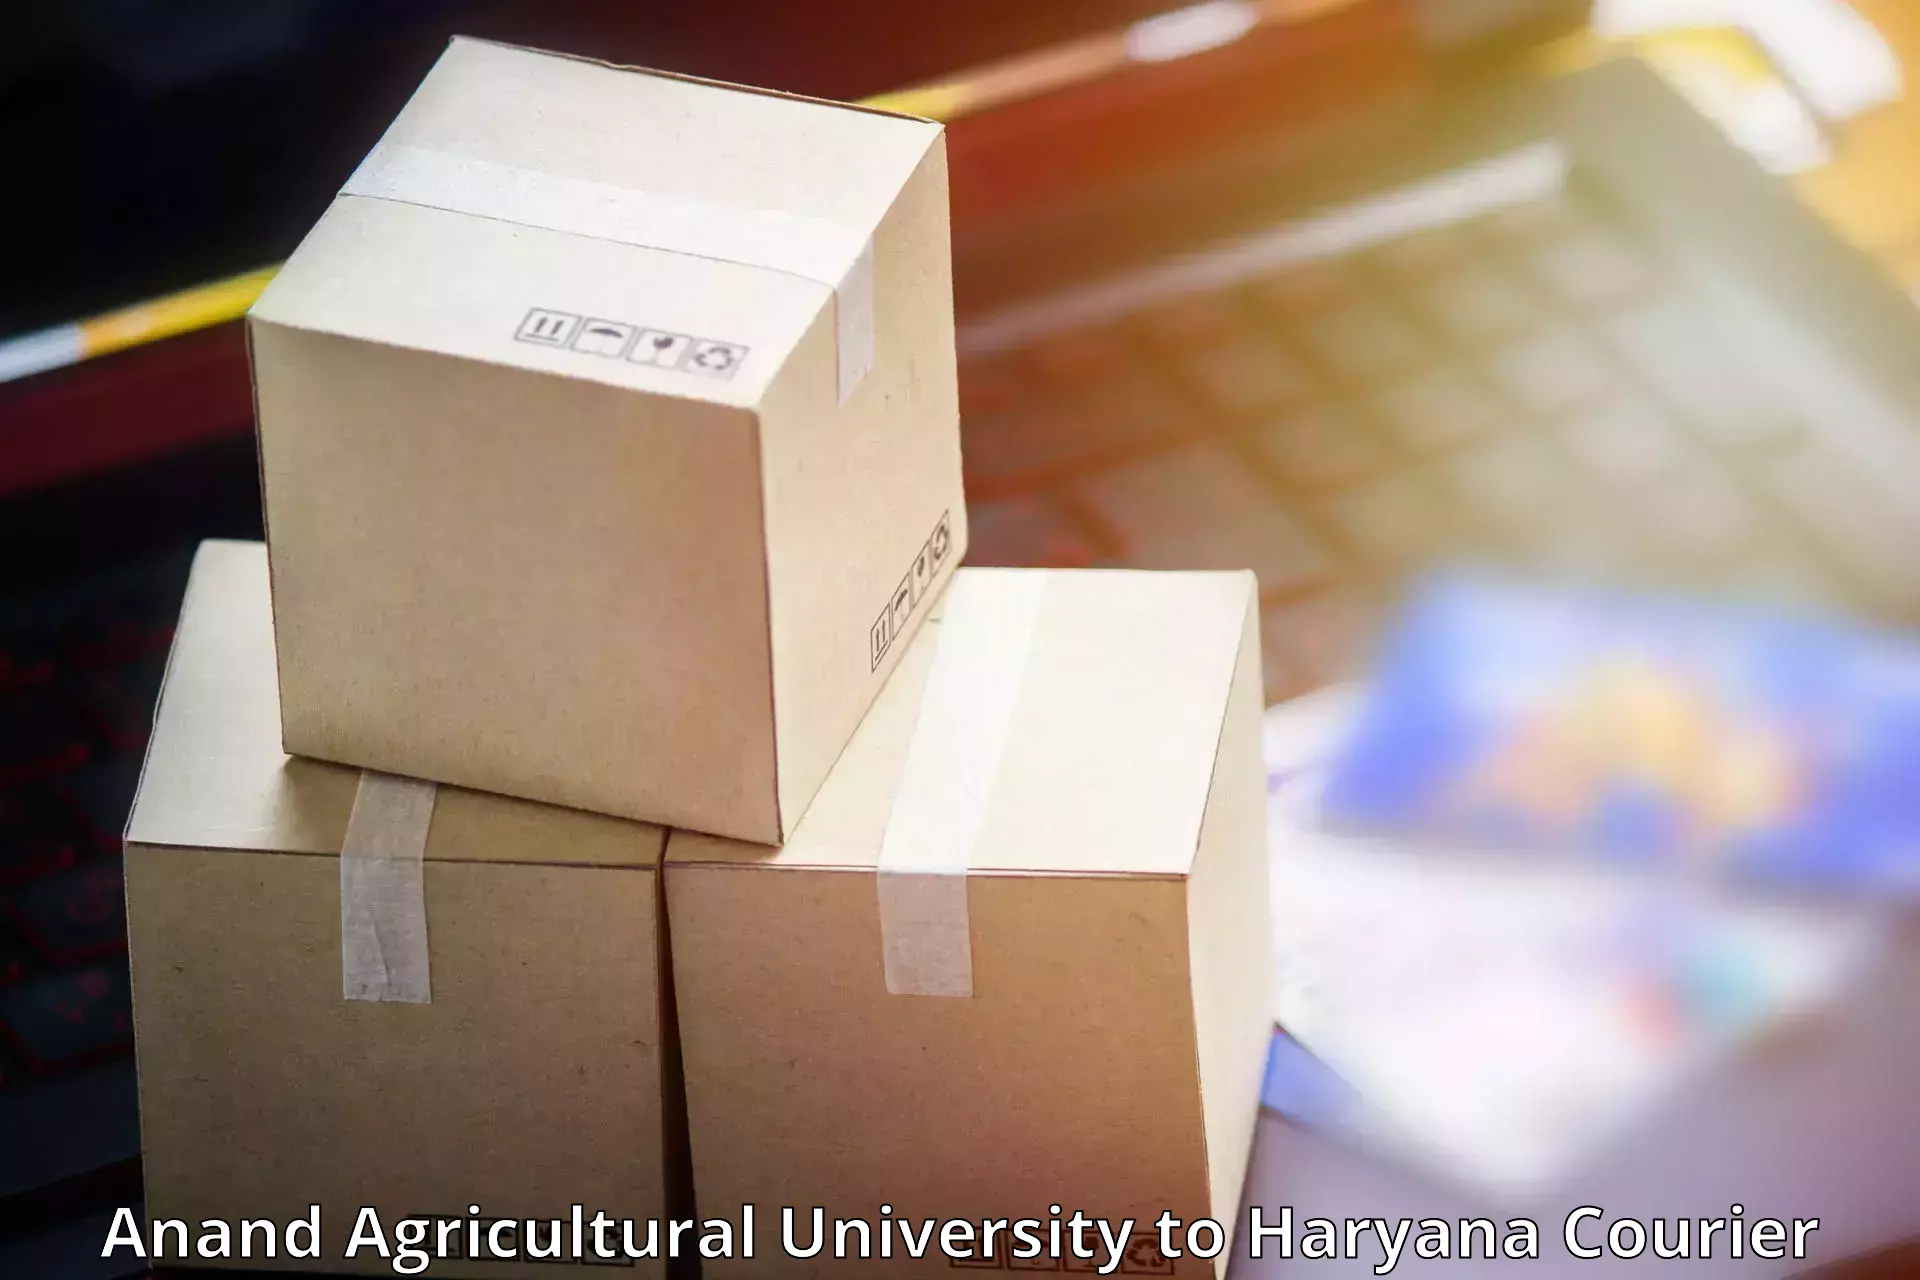 Courier service innovation Anand Agricultural University to Odhan